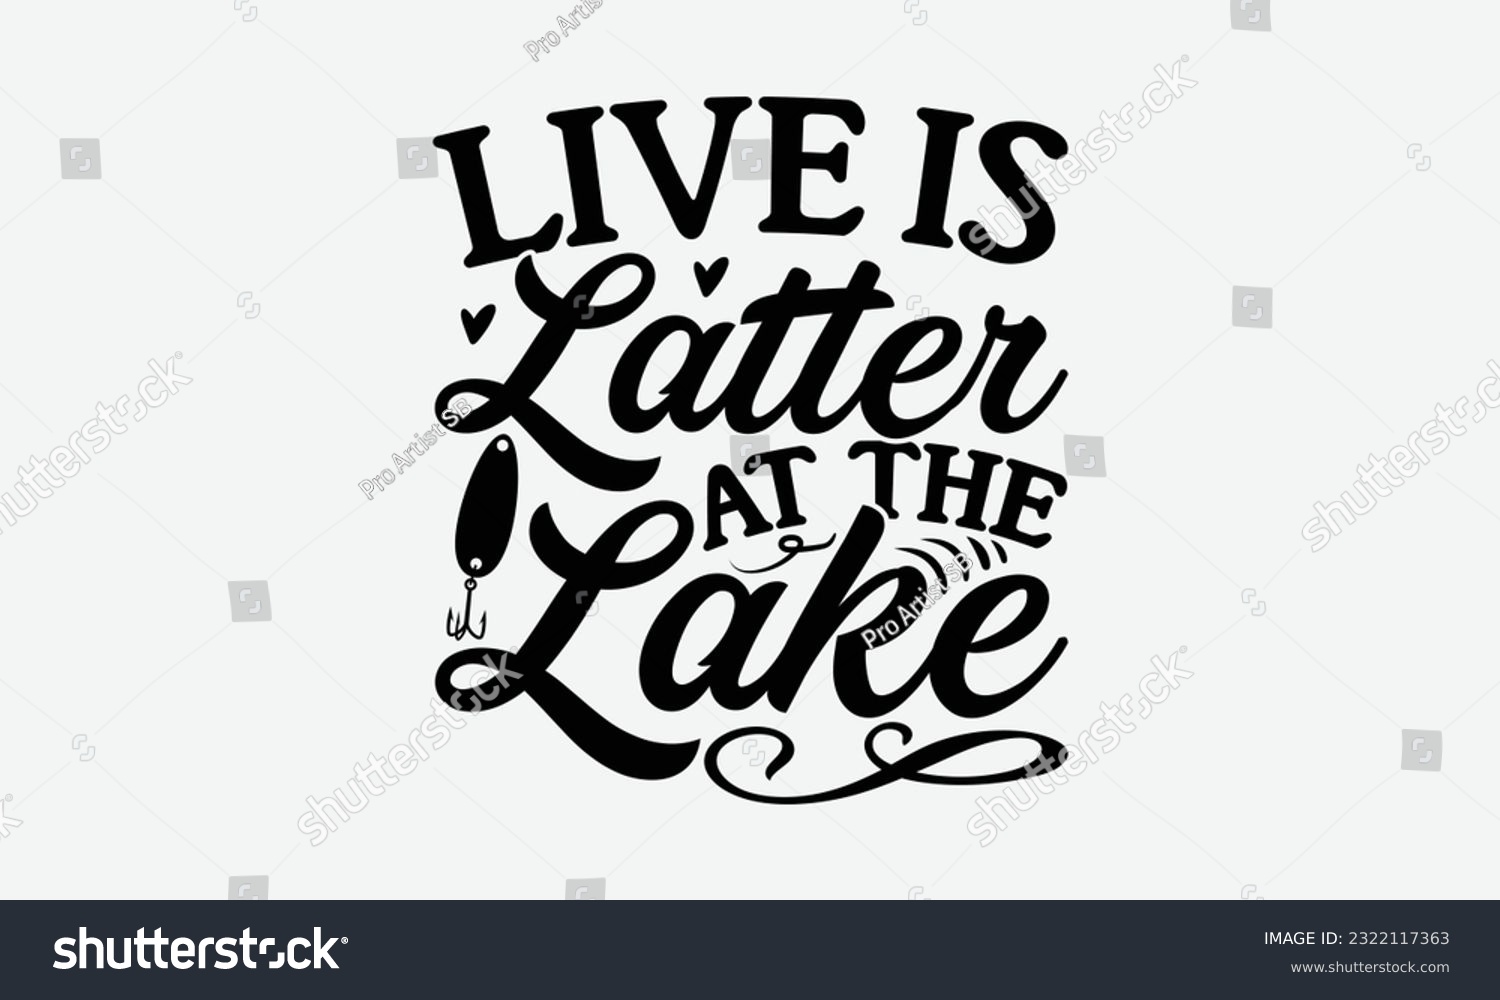 SVG of Live Is Latter At The Lake - Fishing SVG Design, Fisherman Quotes, And Hand Written Vector T-Shirt Design, For Prints on Mugs and Bags, Posters. svg